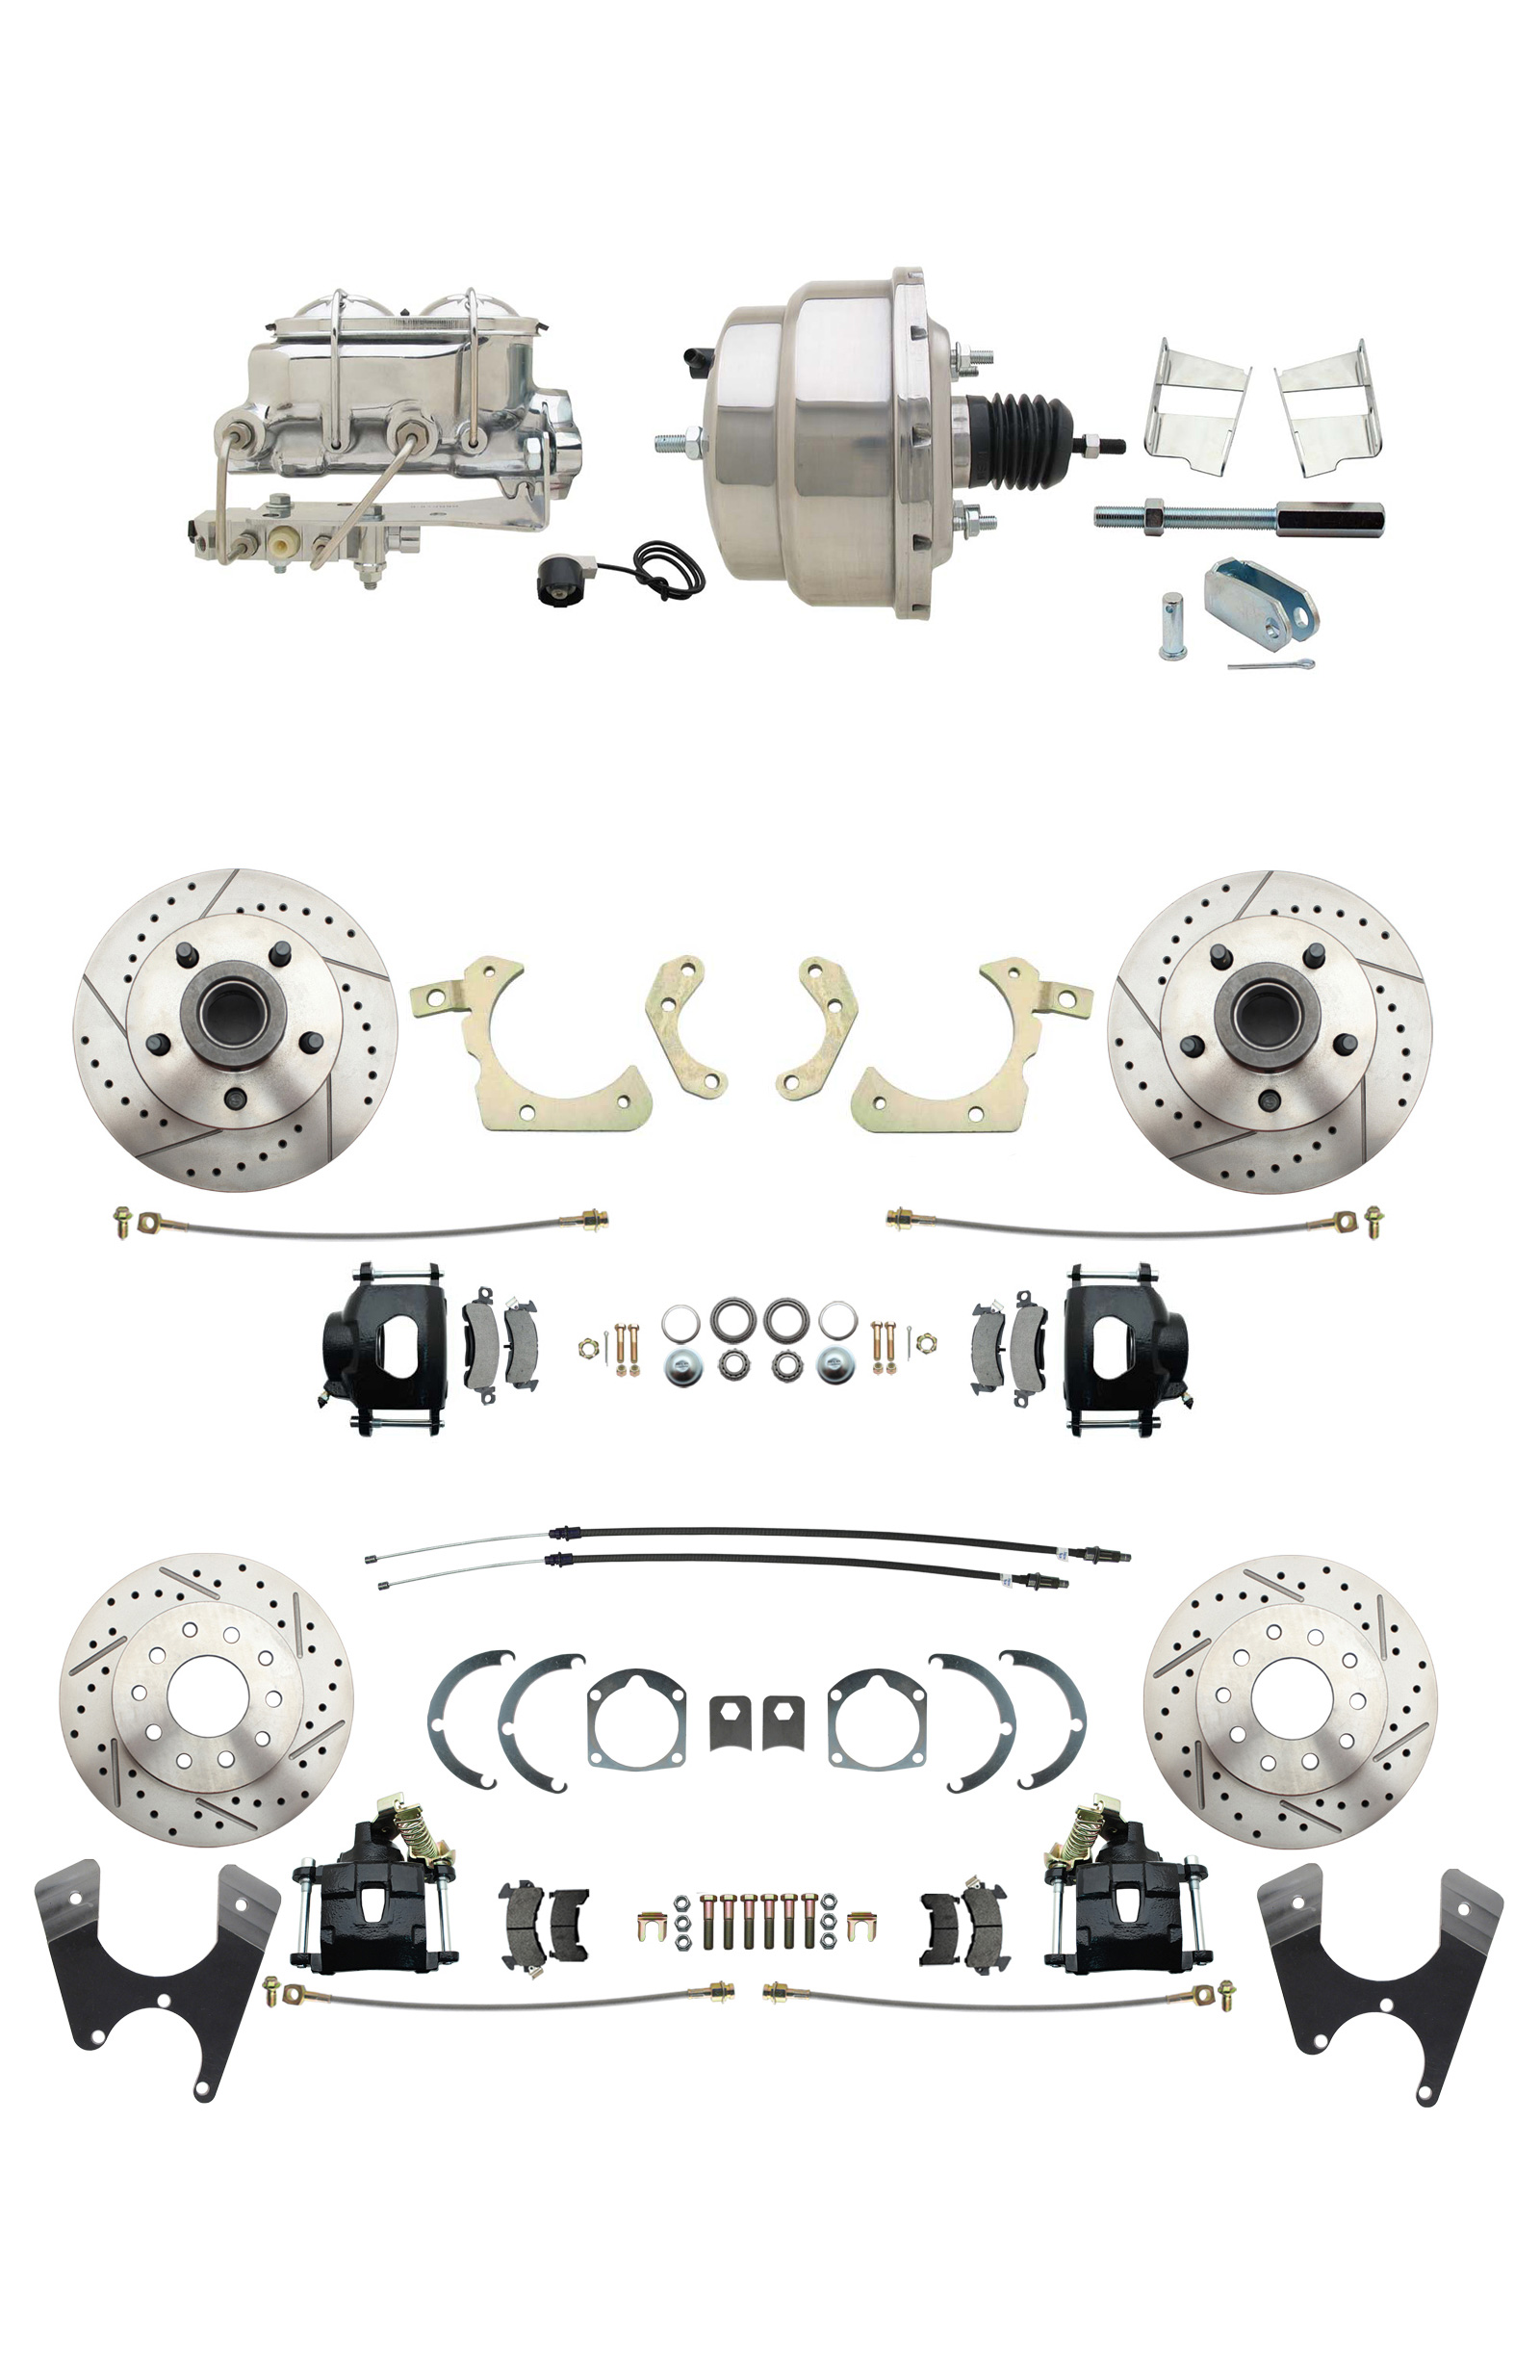 1959-1964 GM Full Size Front & Rear Power Disc Brake Kit Black Powder Coated Calipers Drilled/Slotted Rotors (Impala, Bel Air, Biscayne) & 8 Dual Stainless Steel Conversion Kit W/ Chrome Master Cylinder Bottom Mount Dis